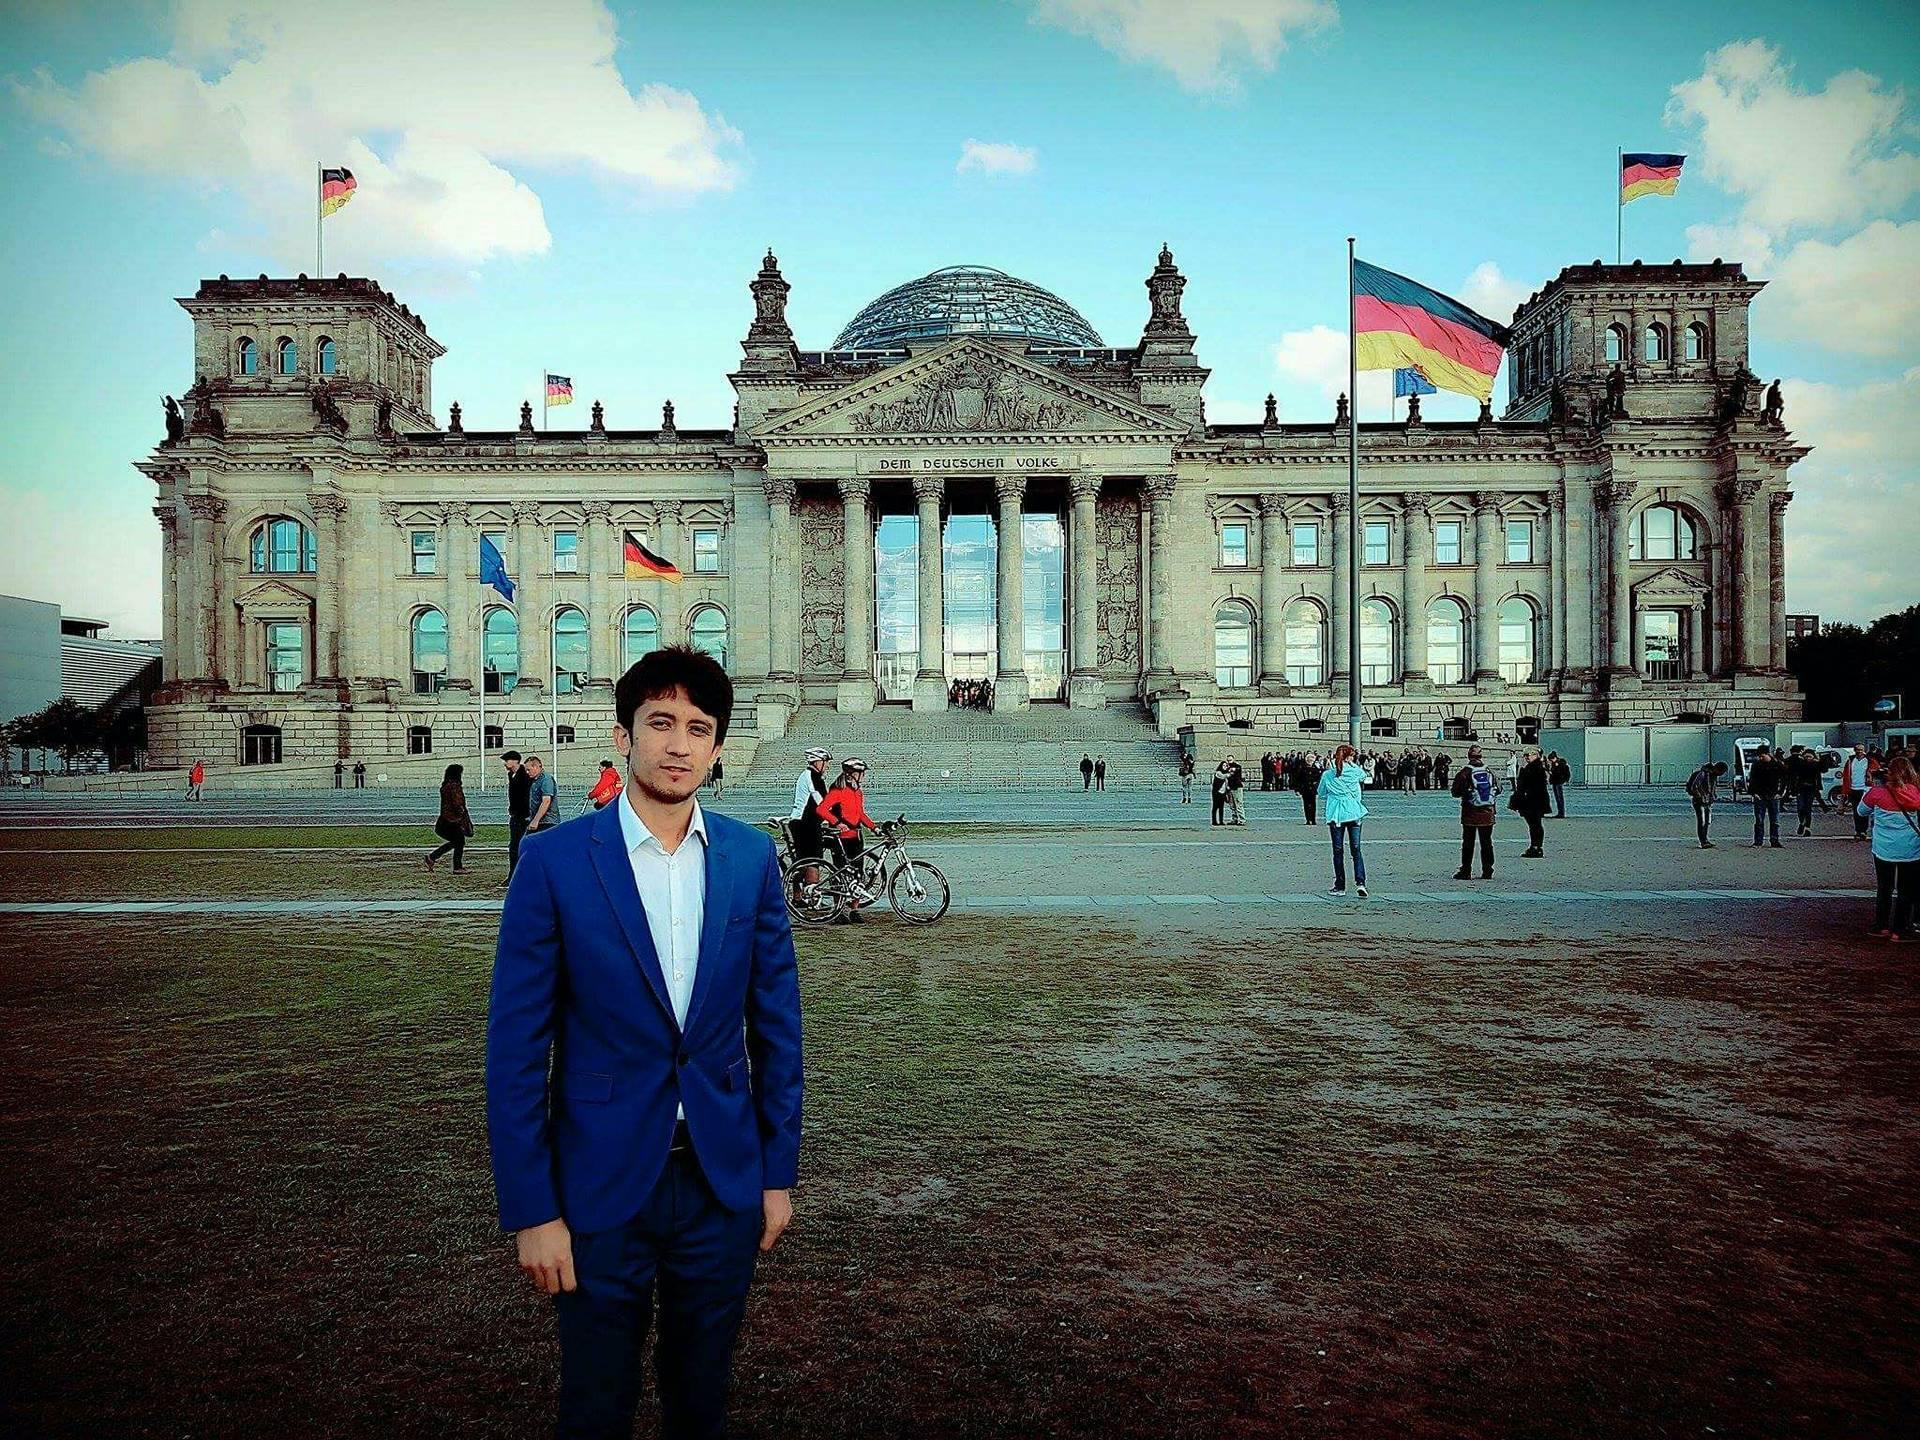 Afghani refugee, Ahmad Wali Temory, has worked in Germany's parliament with the goal of helping preserve the policies that brought him to Germany. 